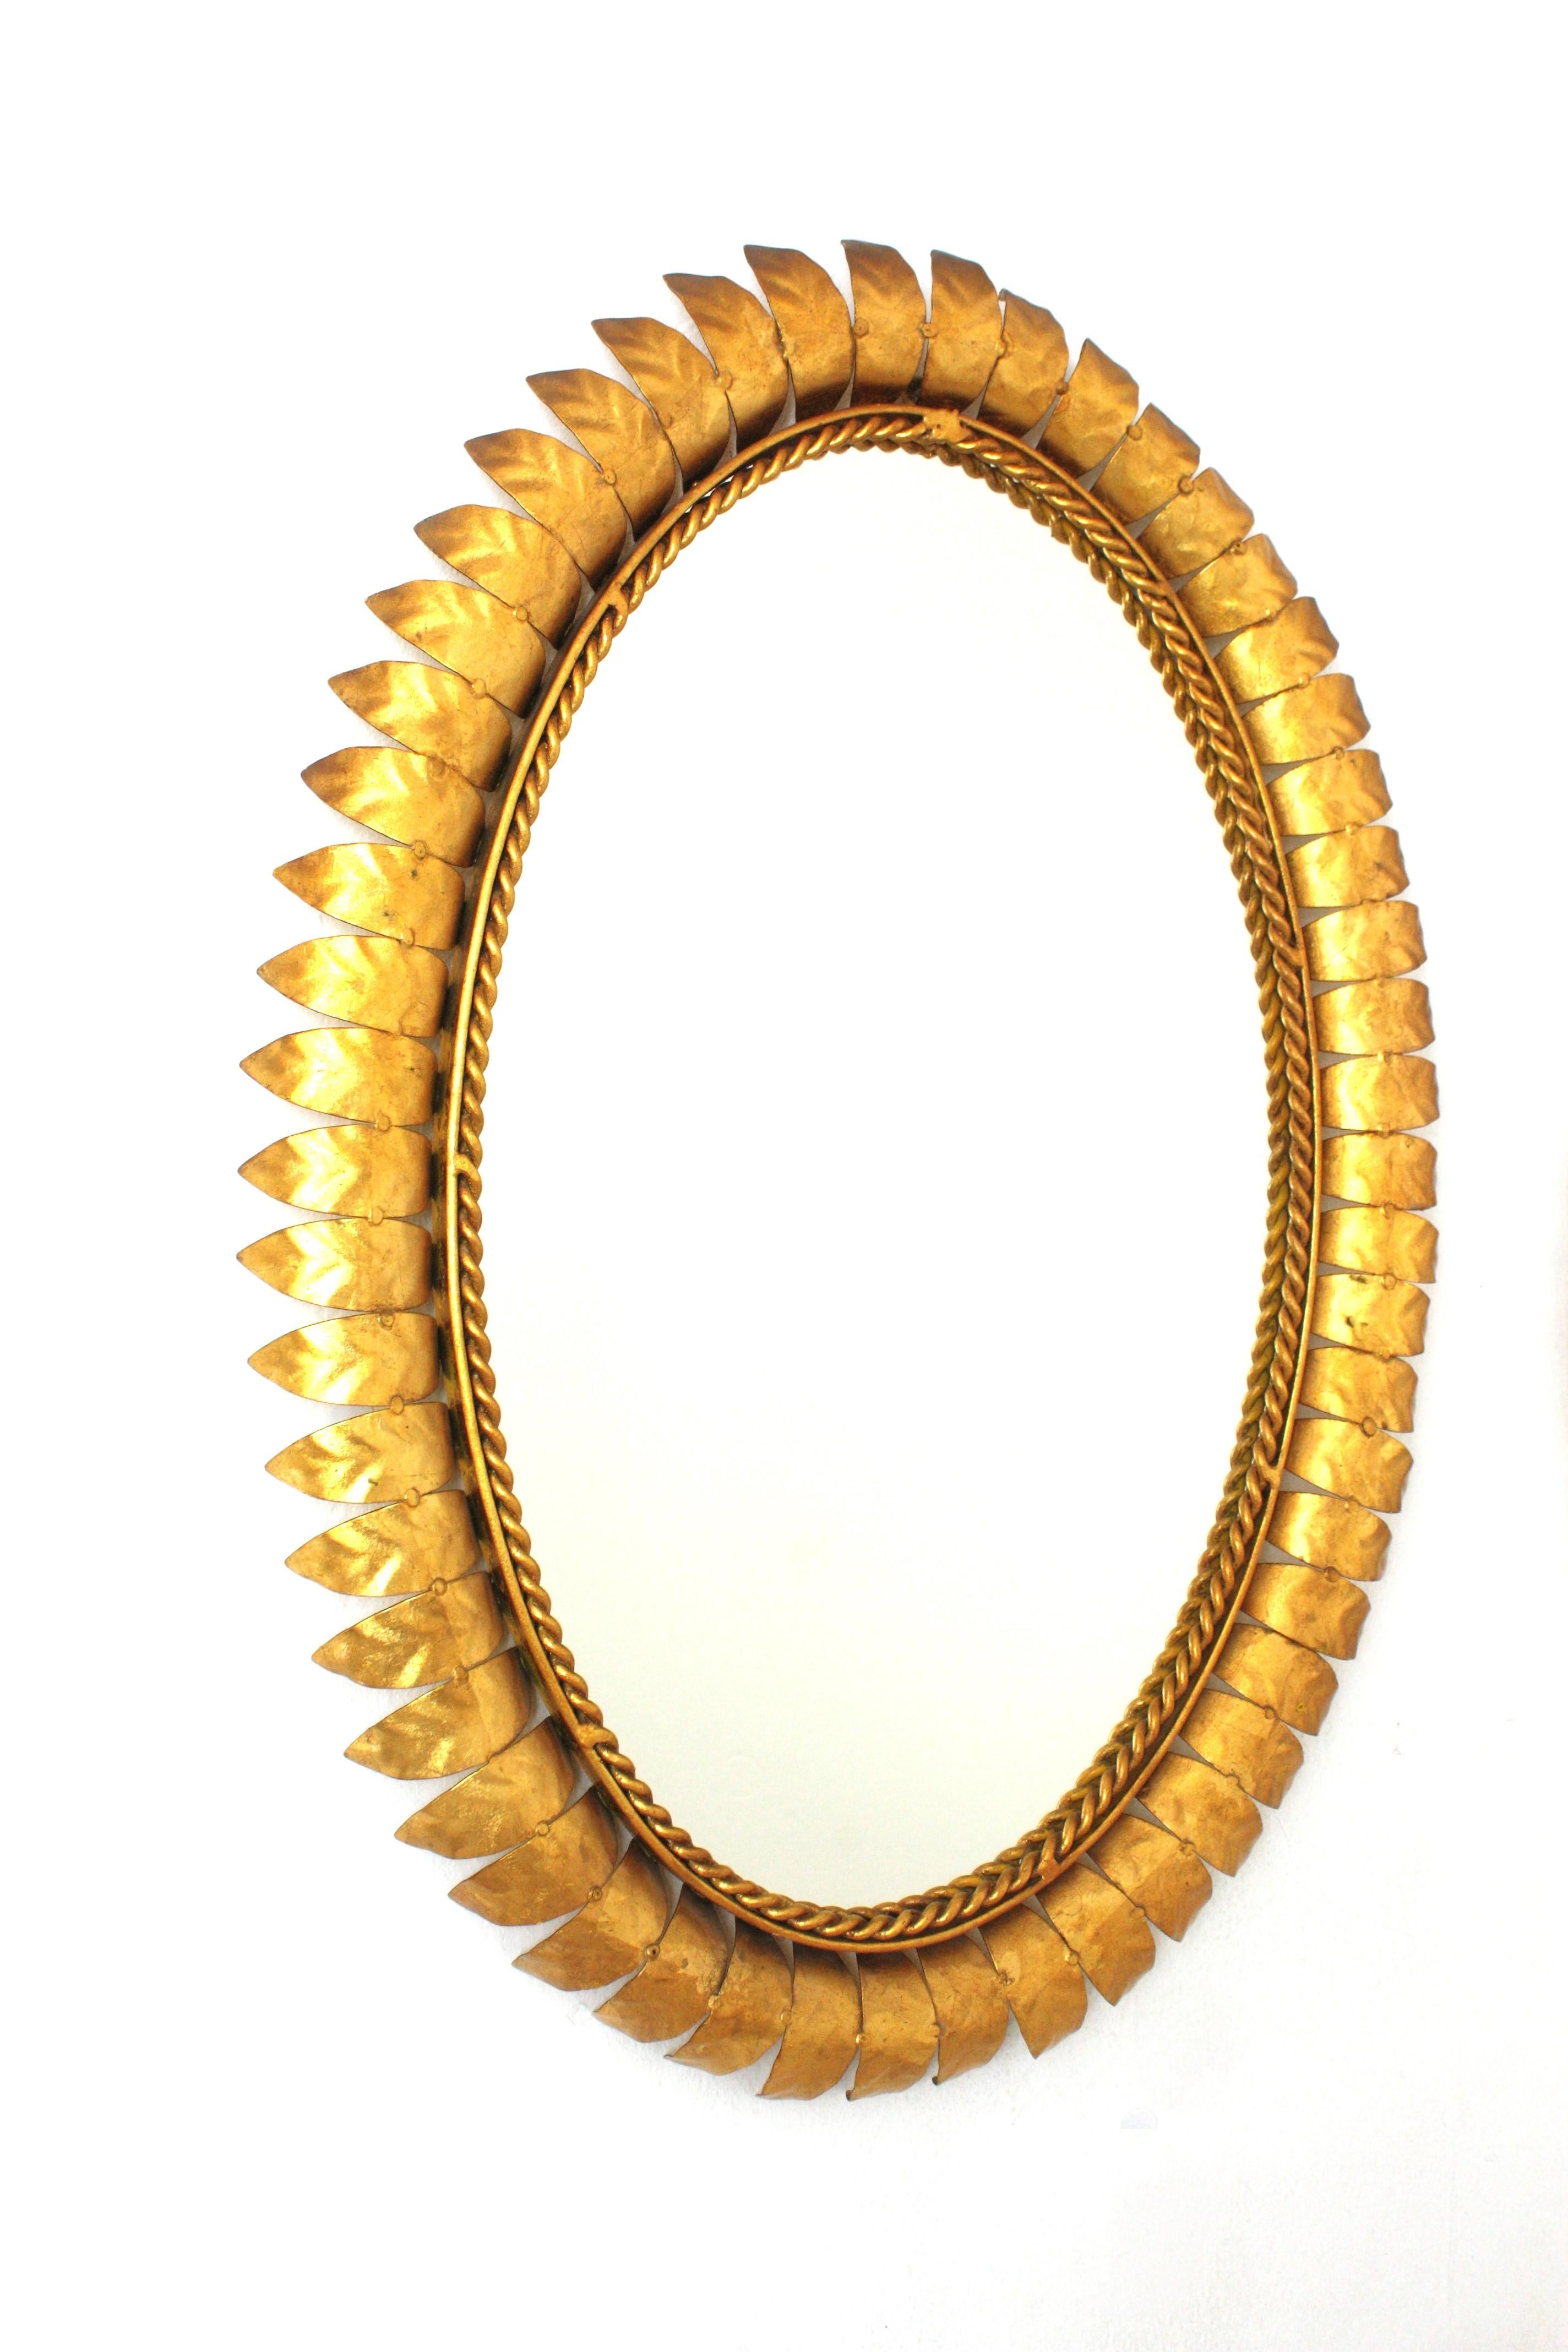 Spanish Pair of Sunburst Oval Mirrors in Gilt Metal For Sale